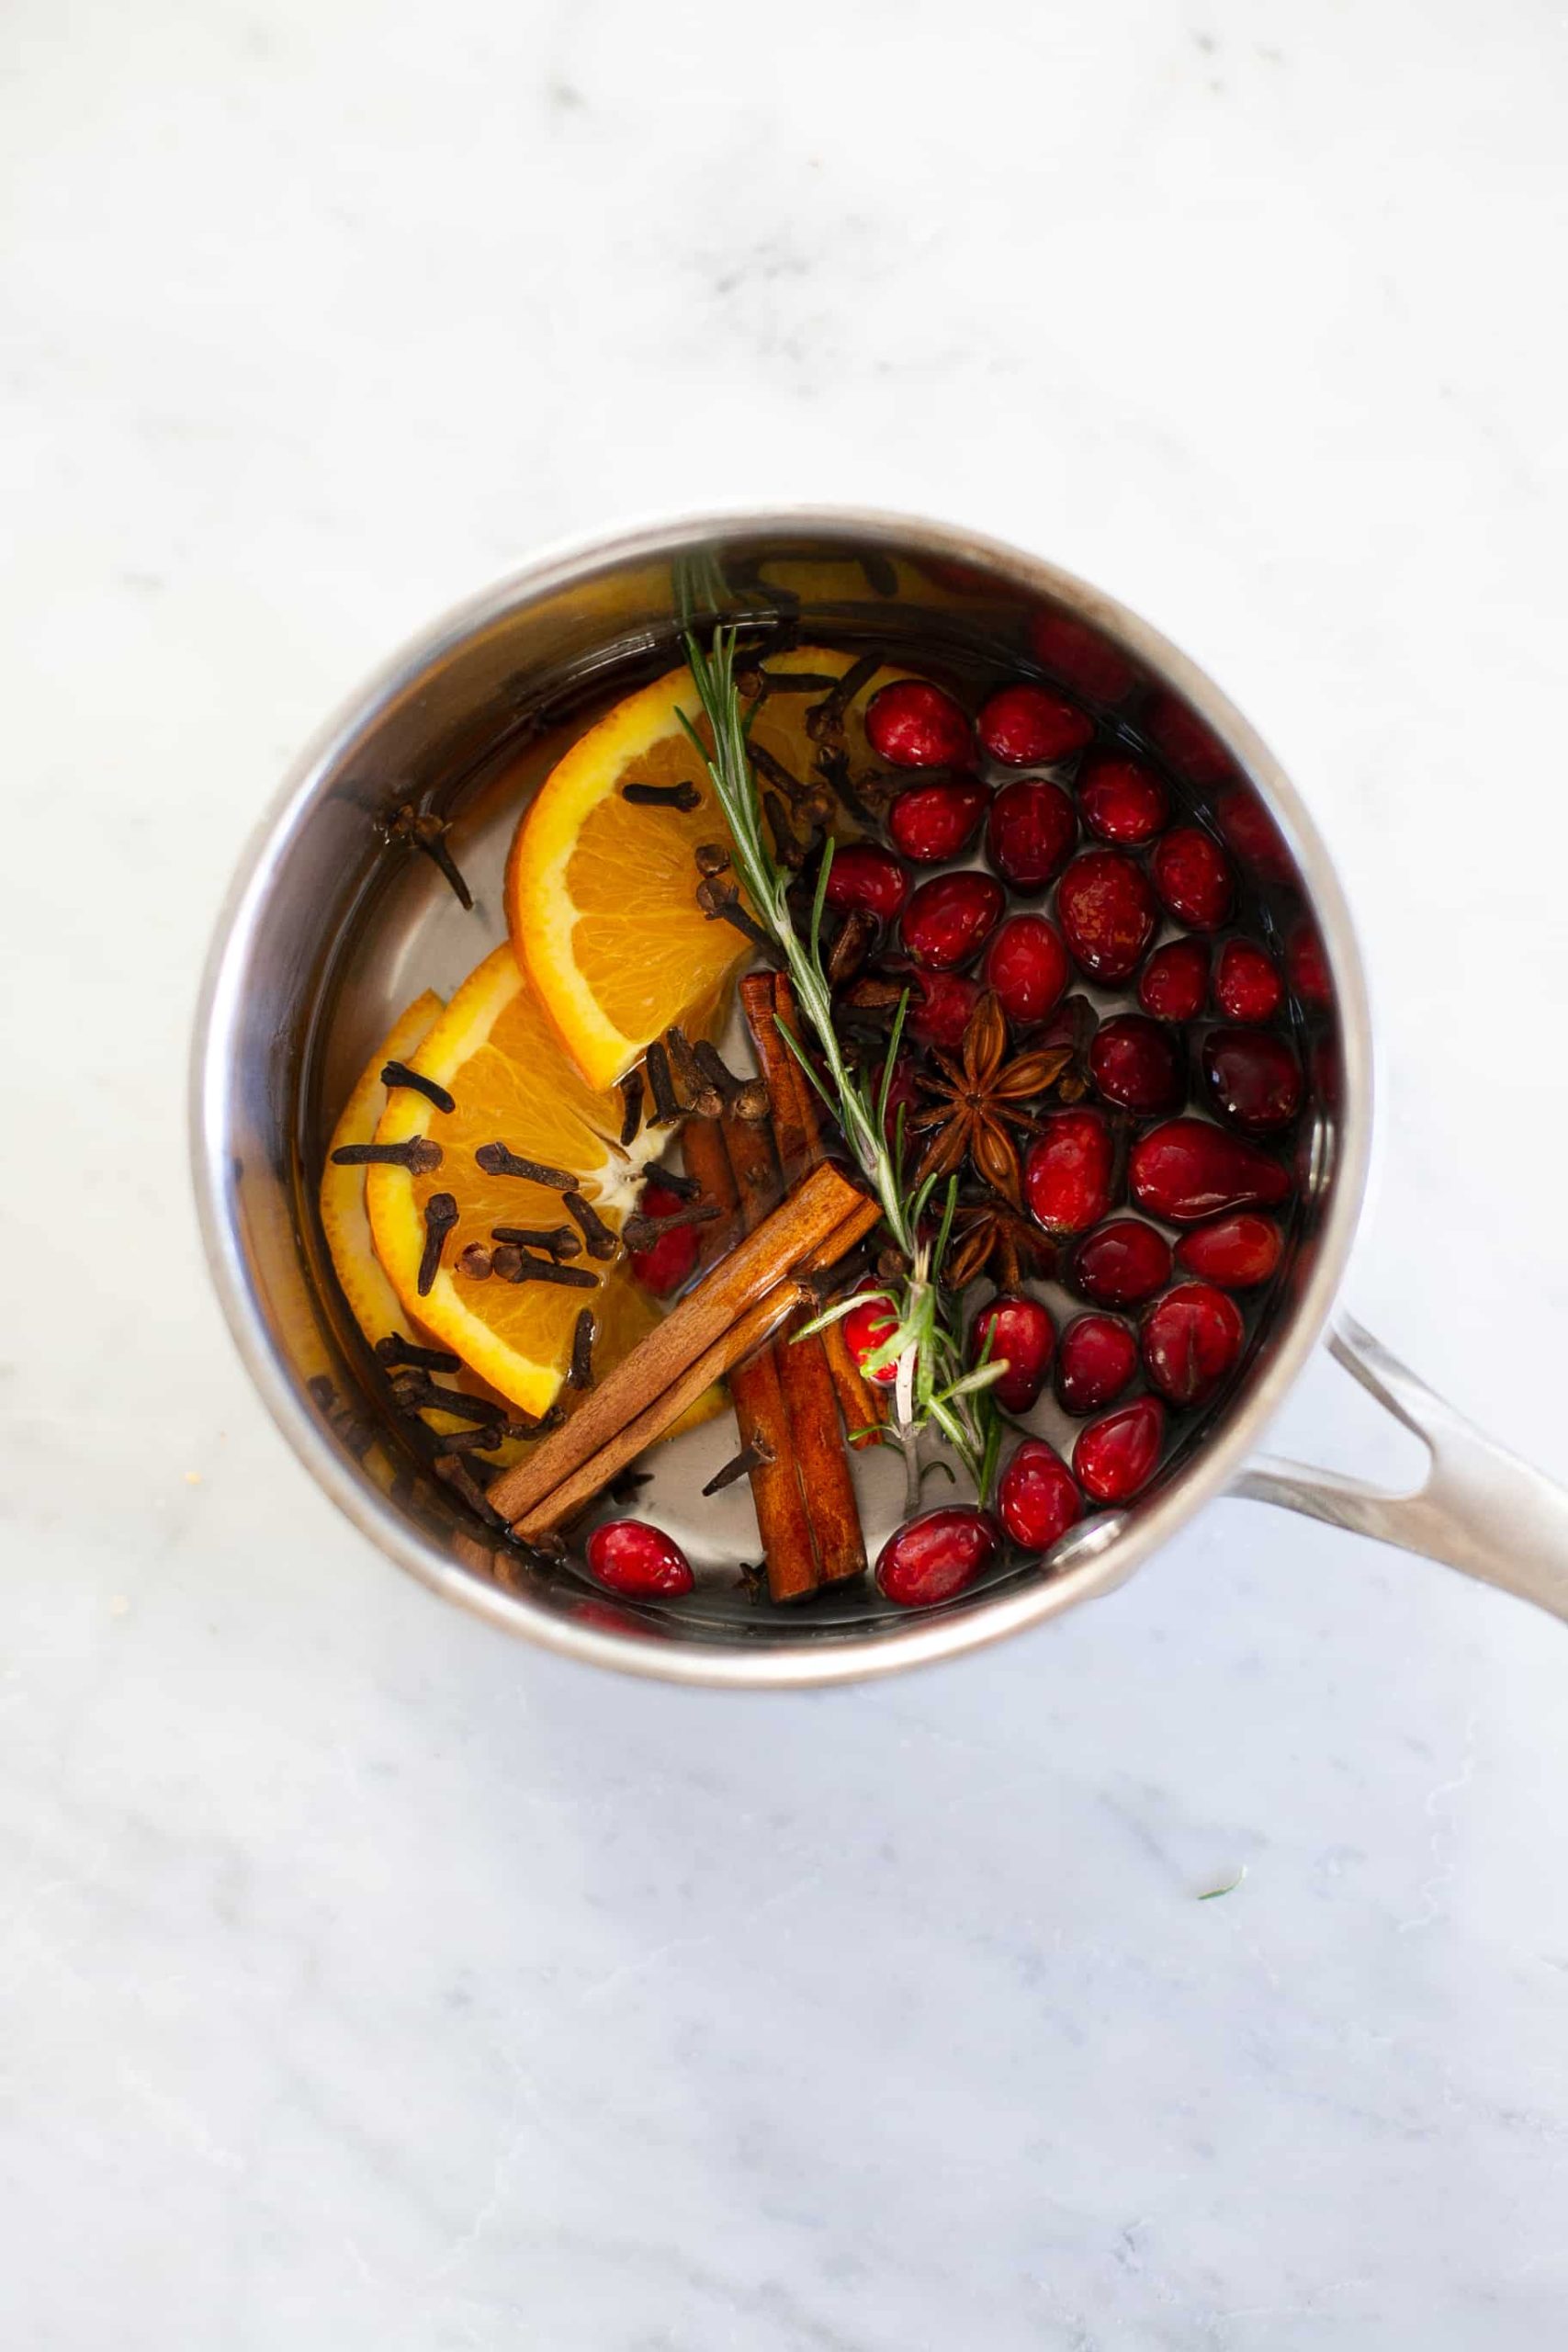 How to Make DIY Potpourri: Instructions & 3 Great Recipes